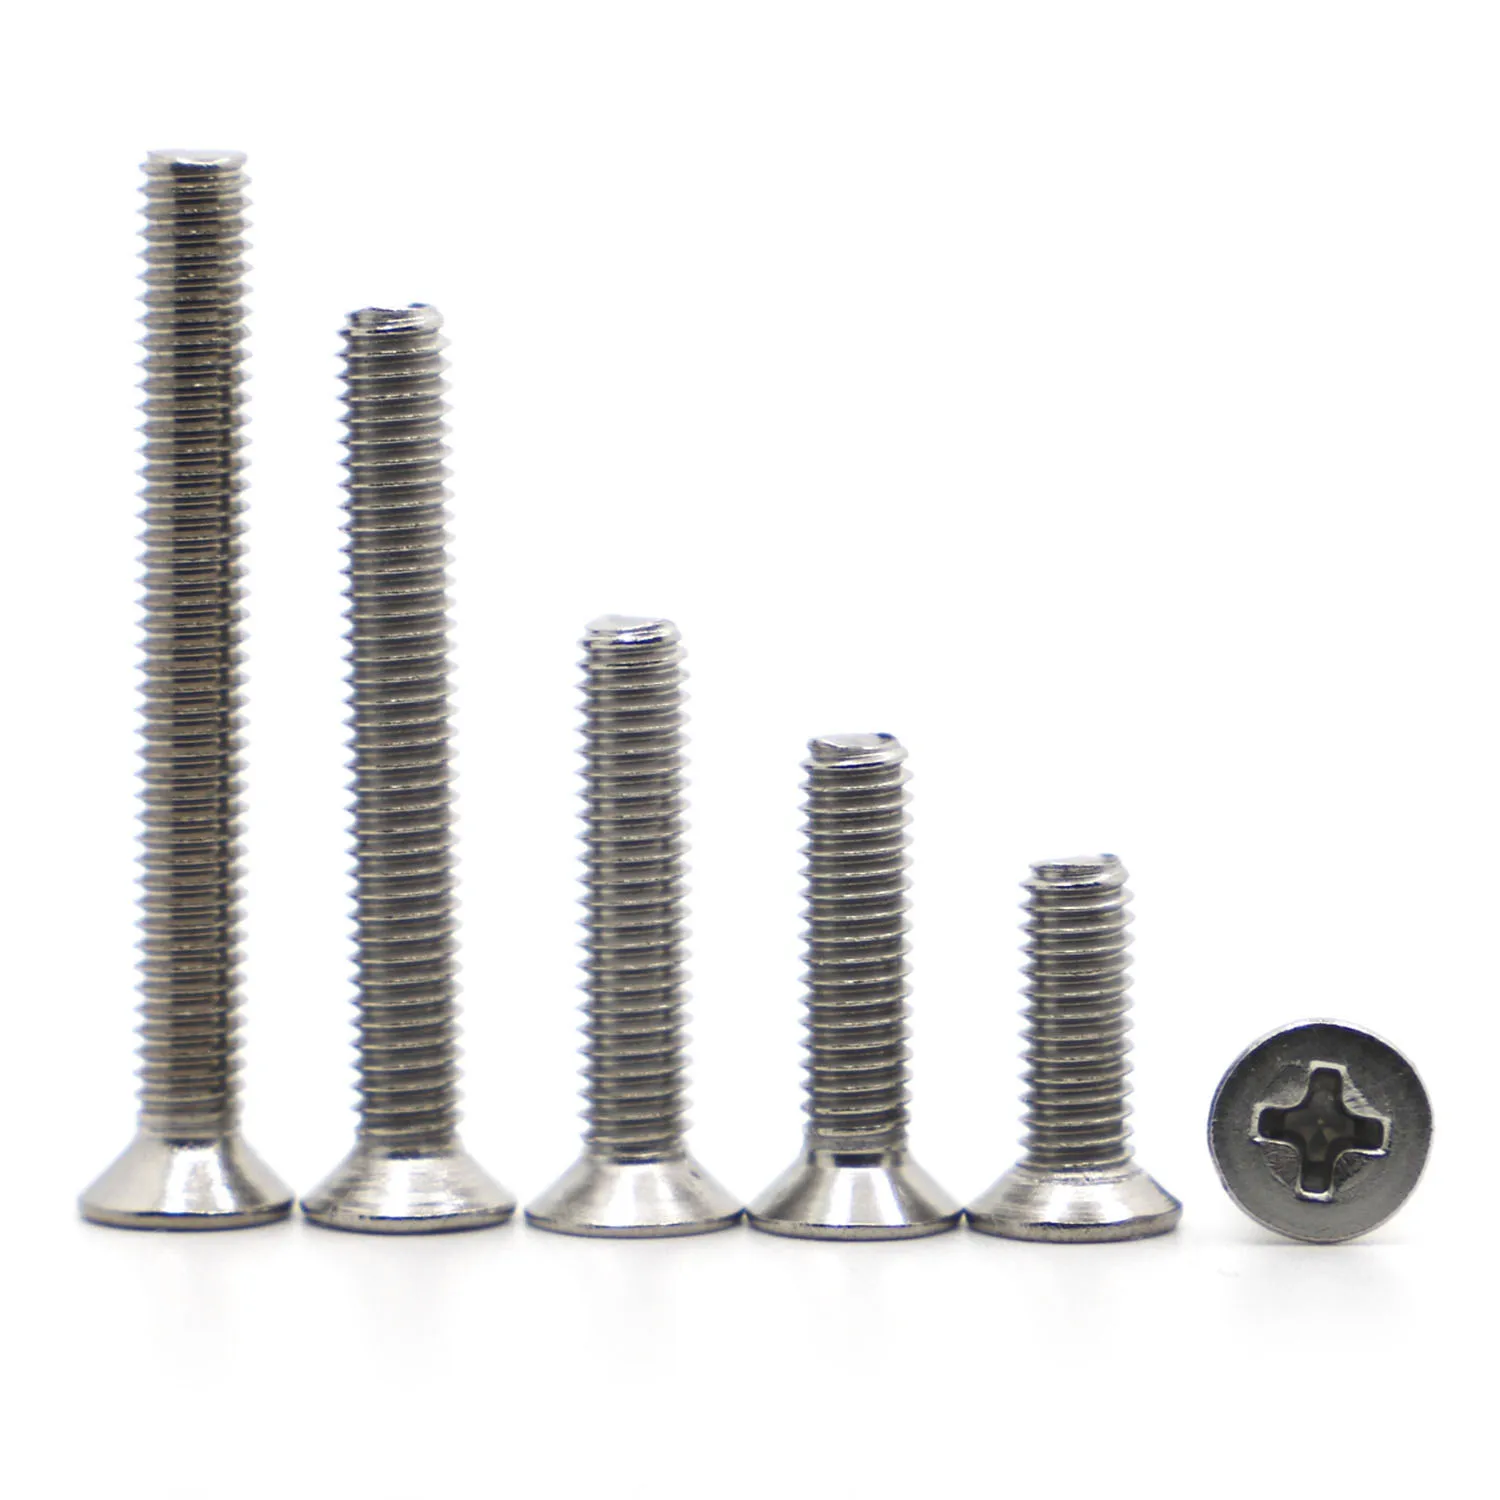 5-50pcs A2-70 304 Stainless steel GB819 Cross Phillips Flat Countersunk Head Screw Bolt M1 M1.2 M1.4 M1.6 M2 M2.5 M3 M4 M5 M6 M8